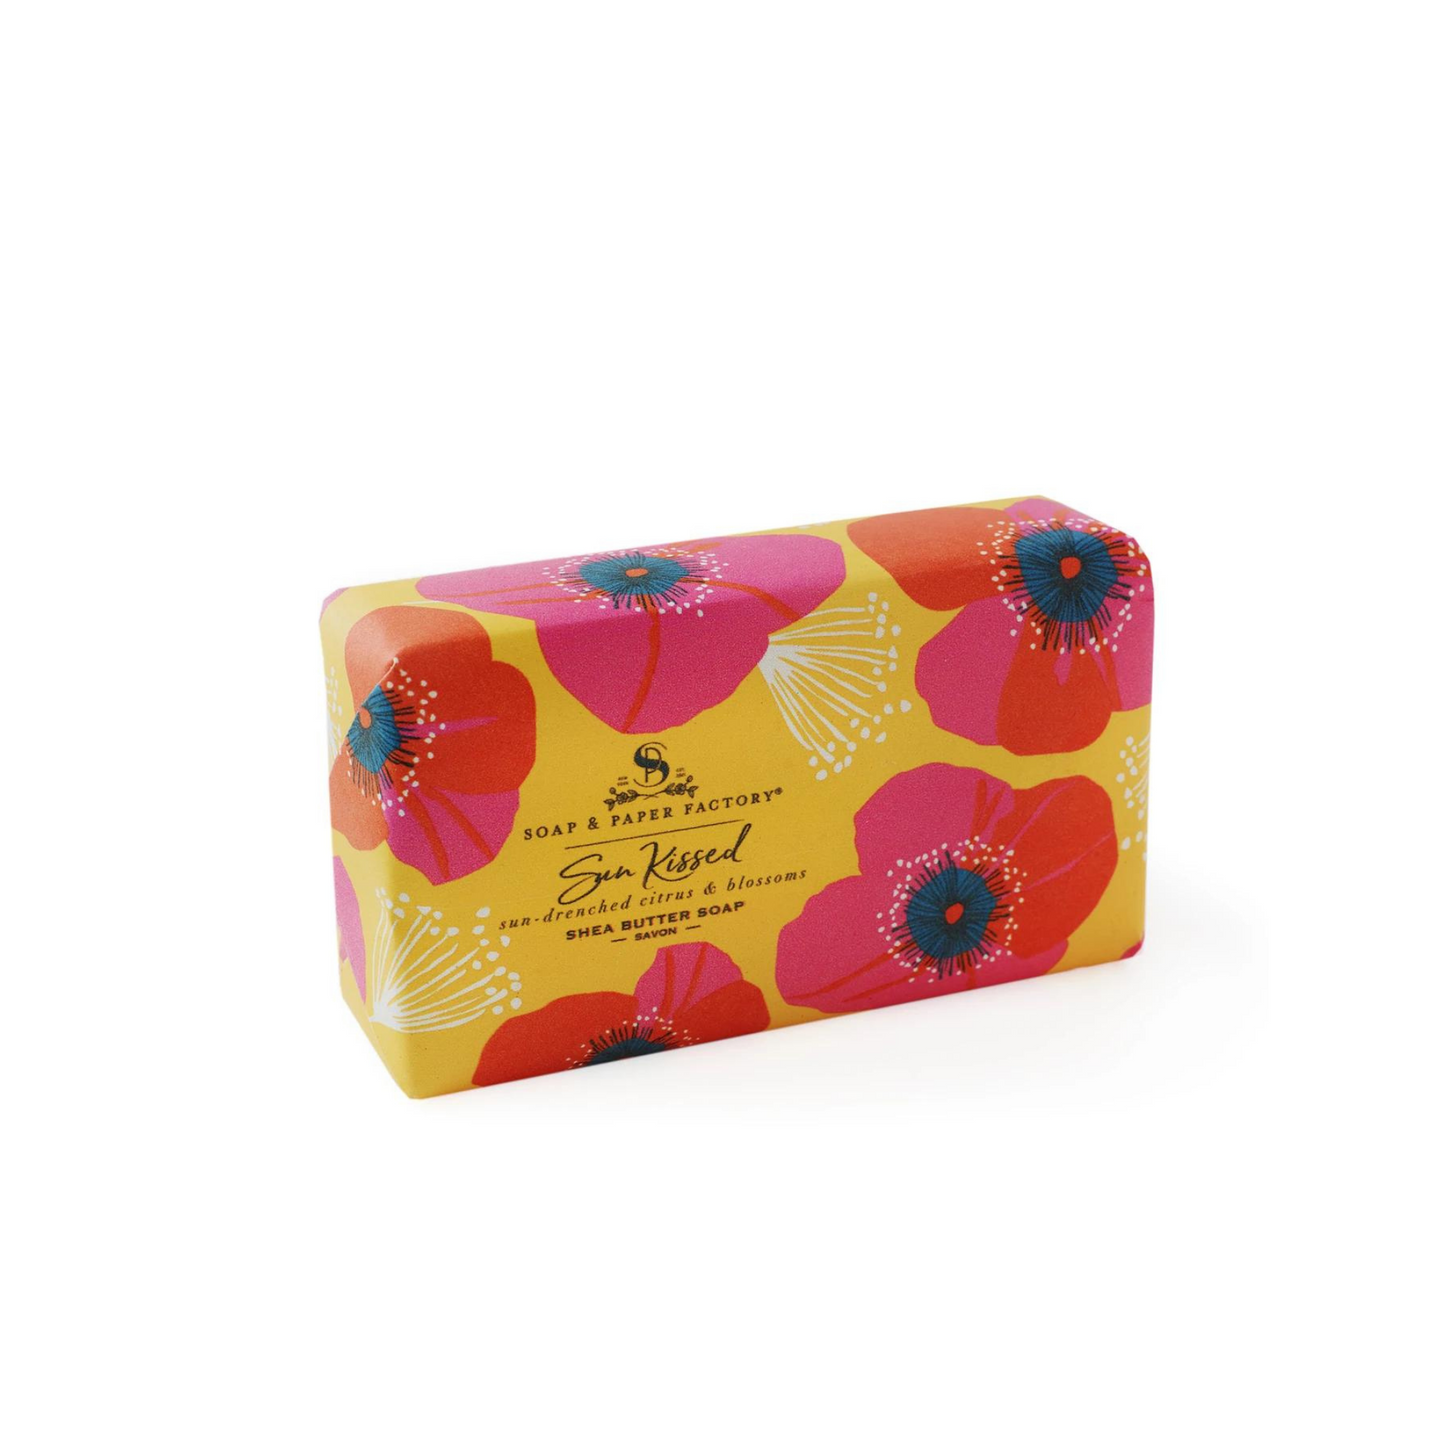 Primary Image of Sun Kissed Shea Butter Soap Bar